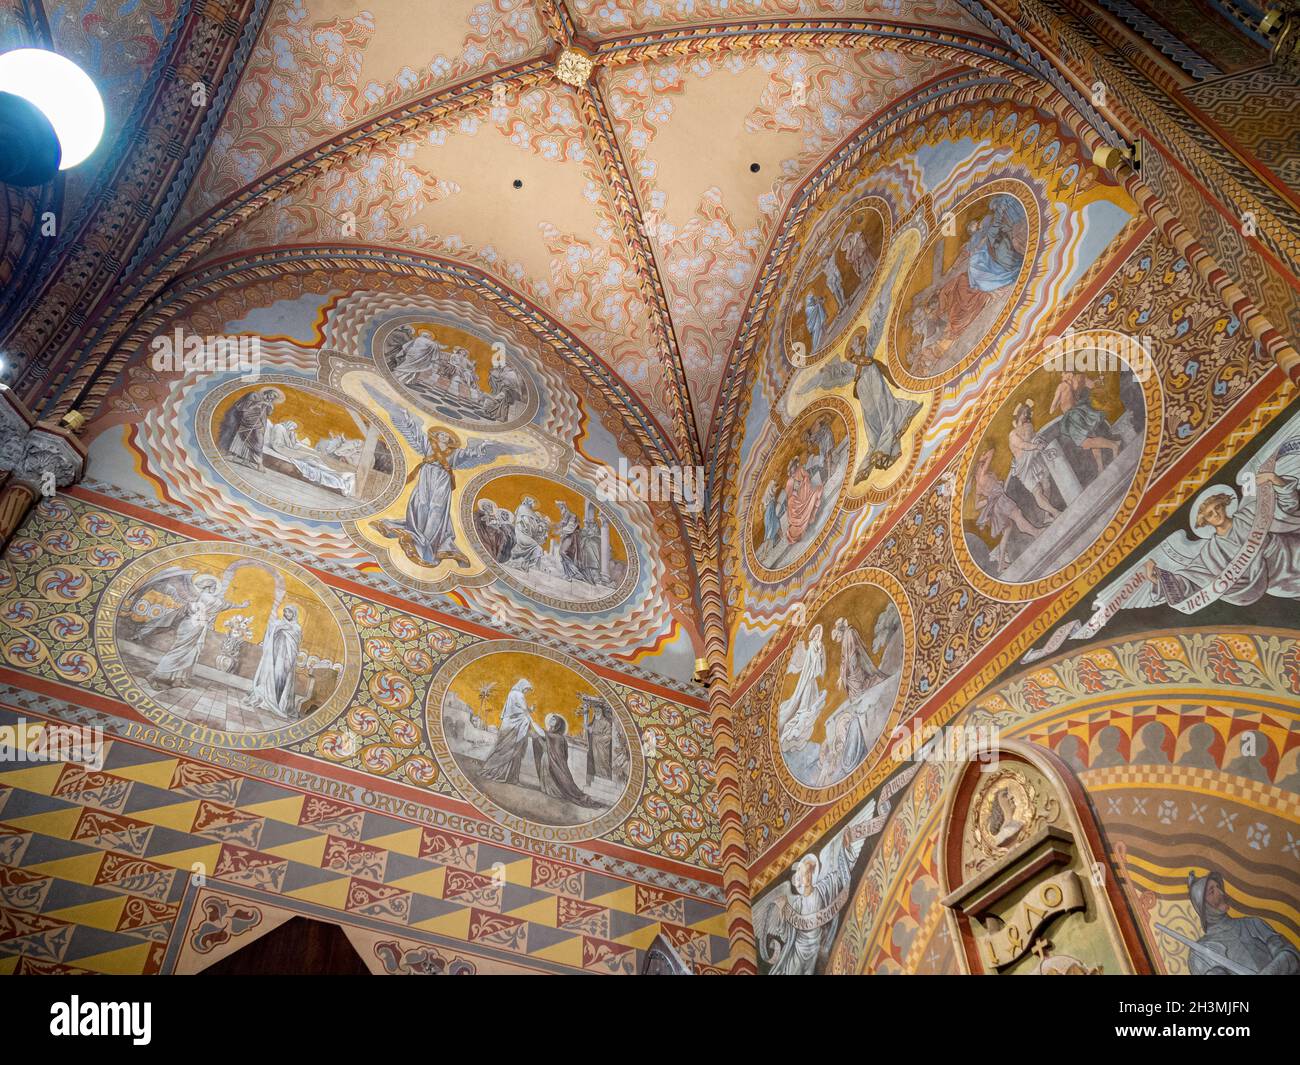 Ceiling at the entrance Veestibule of the Mathias Church: Murals and geometric patterns completly cover and decorate the walls of this entrance to the famous Mathias Church in Buda. Stock Photo